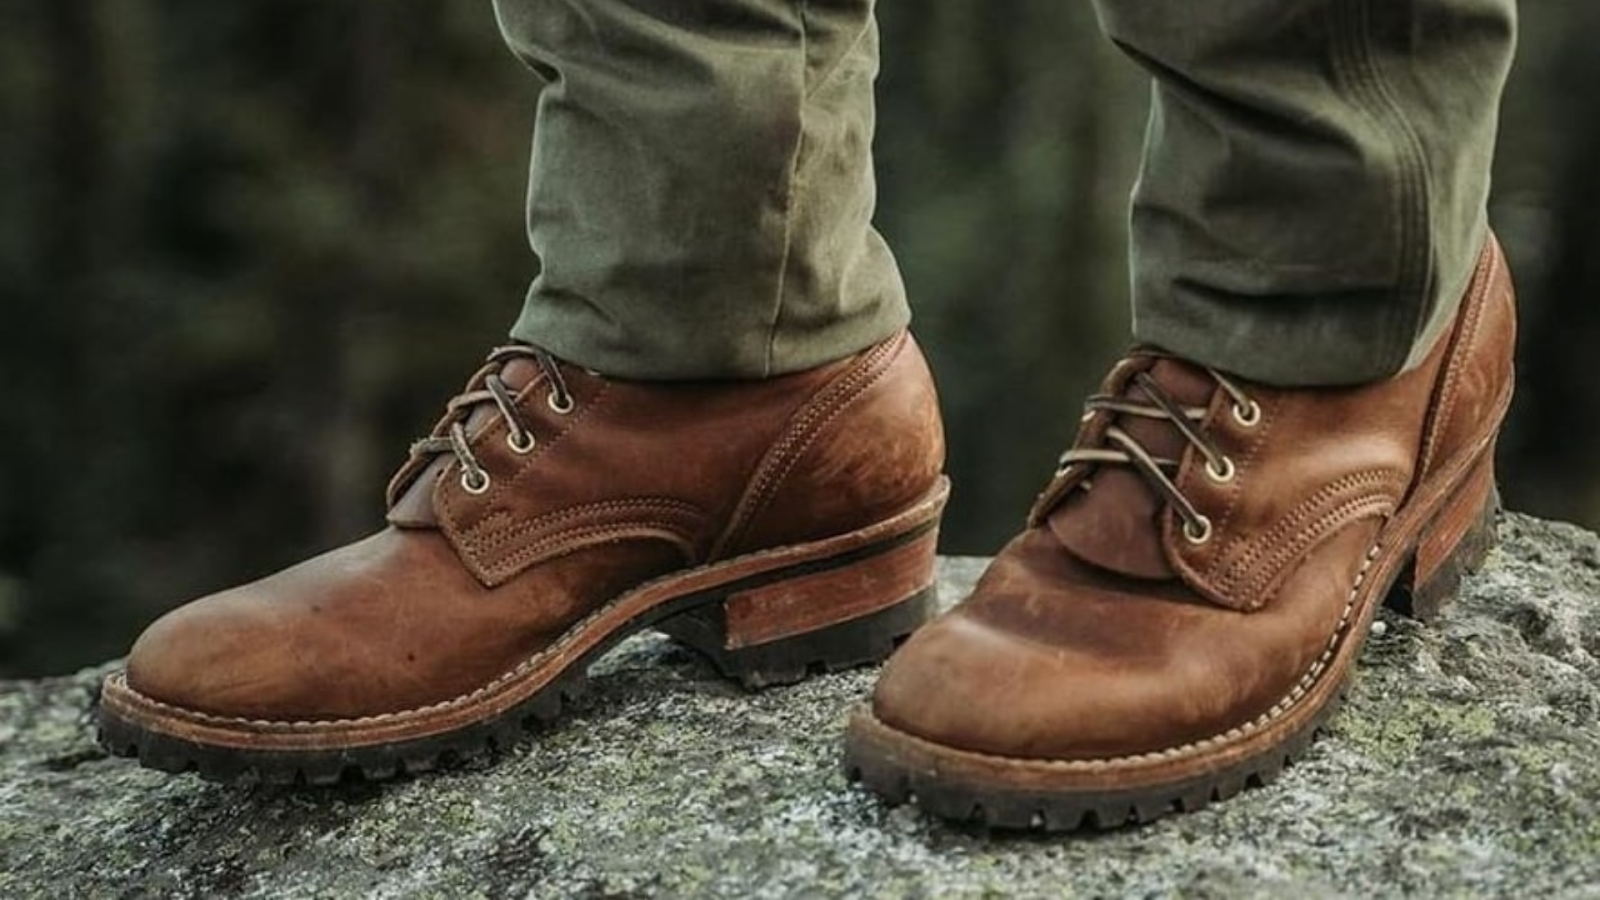 What Makes A Work Boot Comfortable?